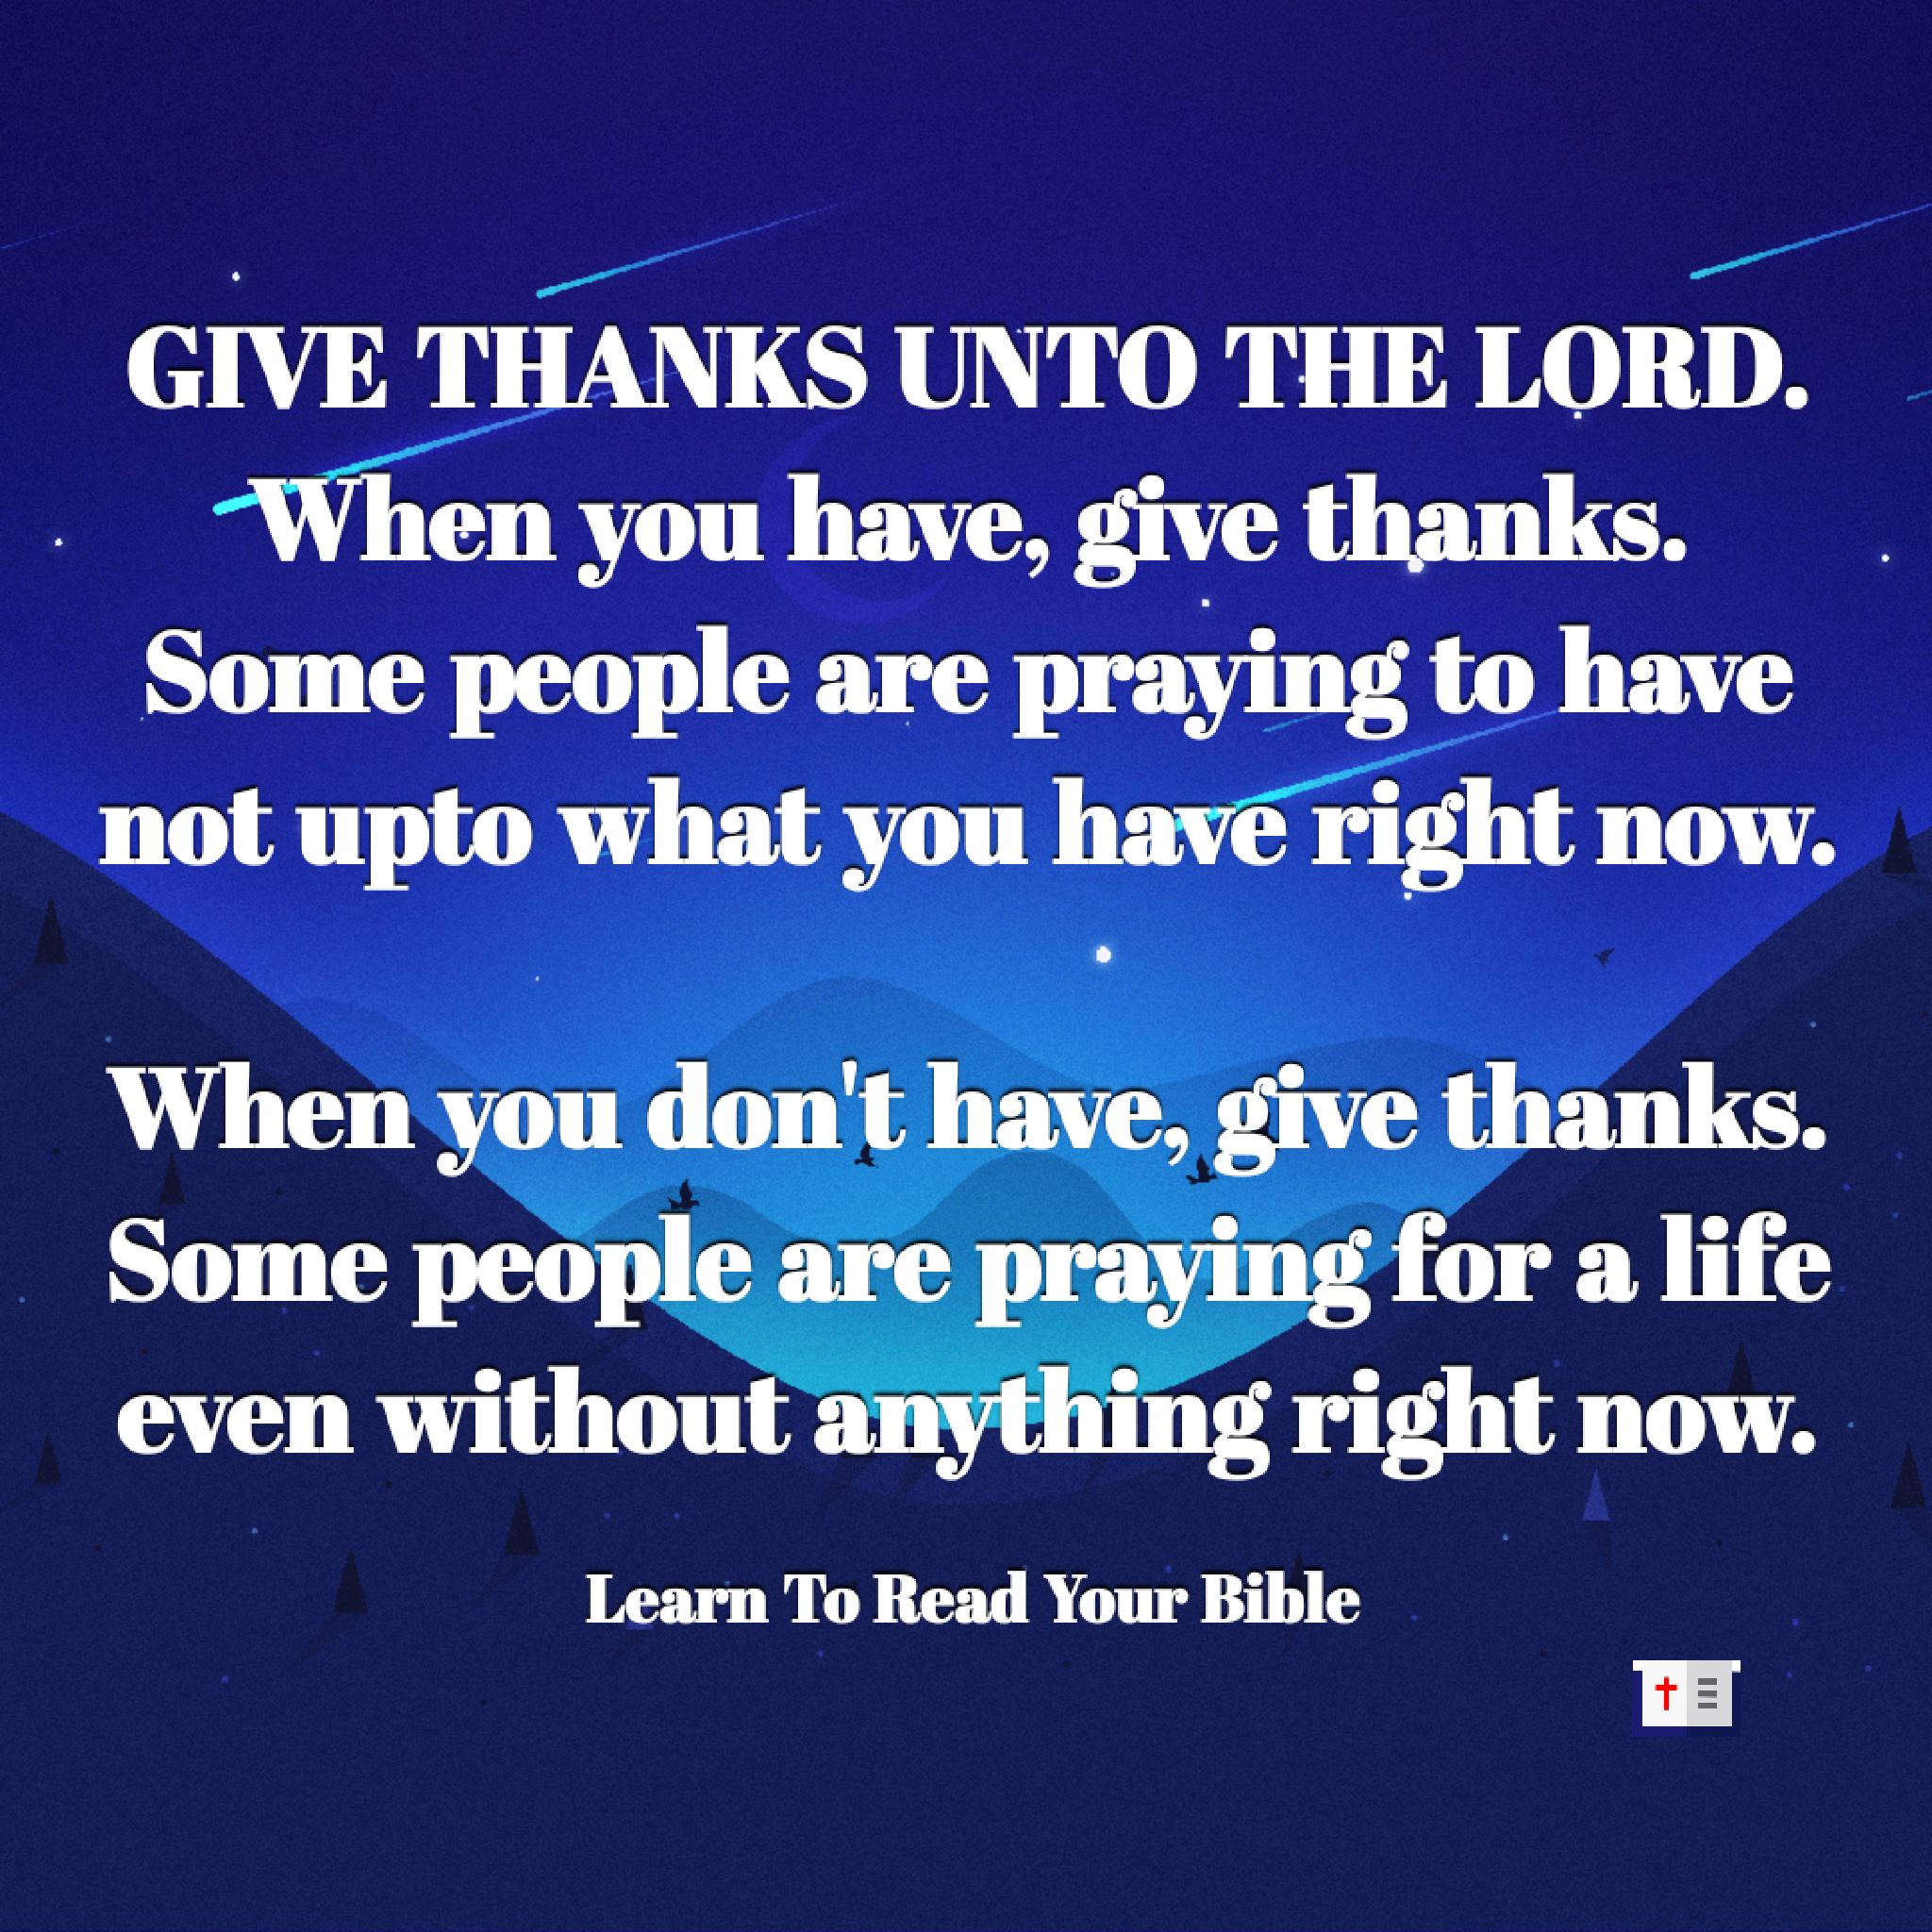 Give thanks unto the Lord